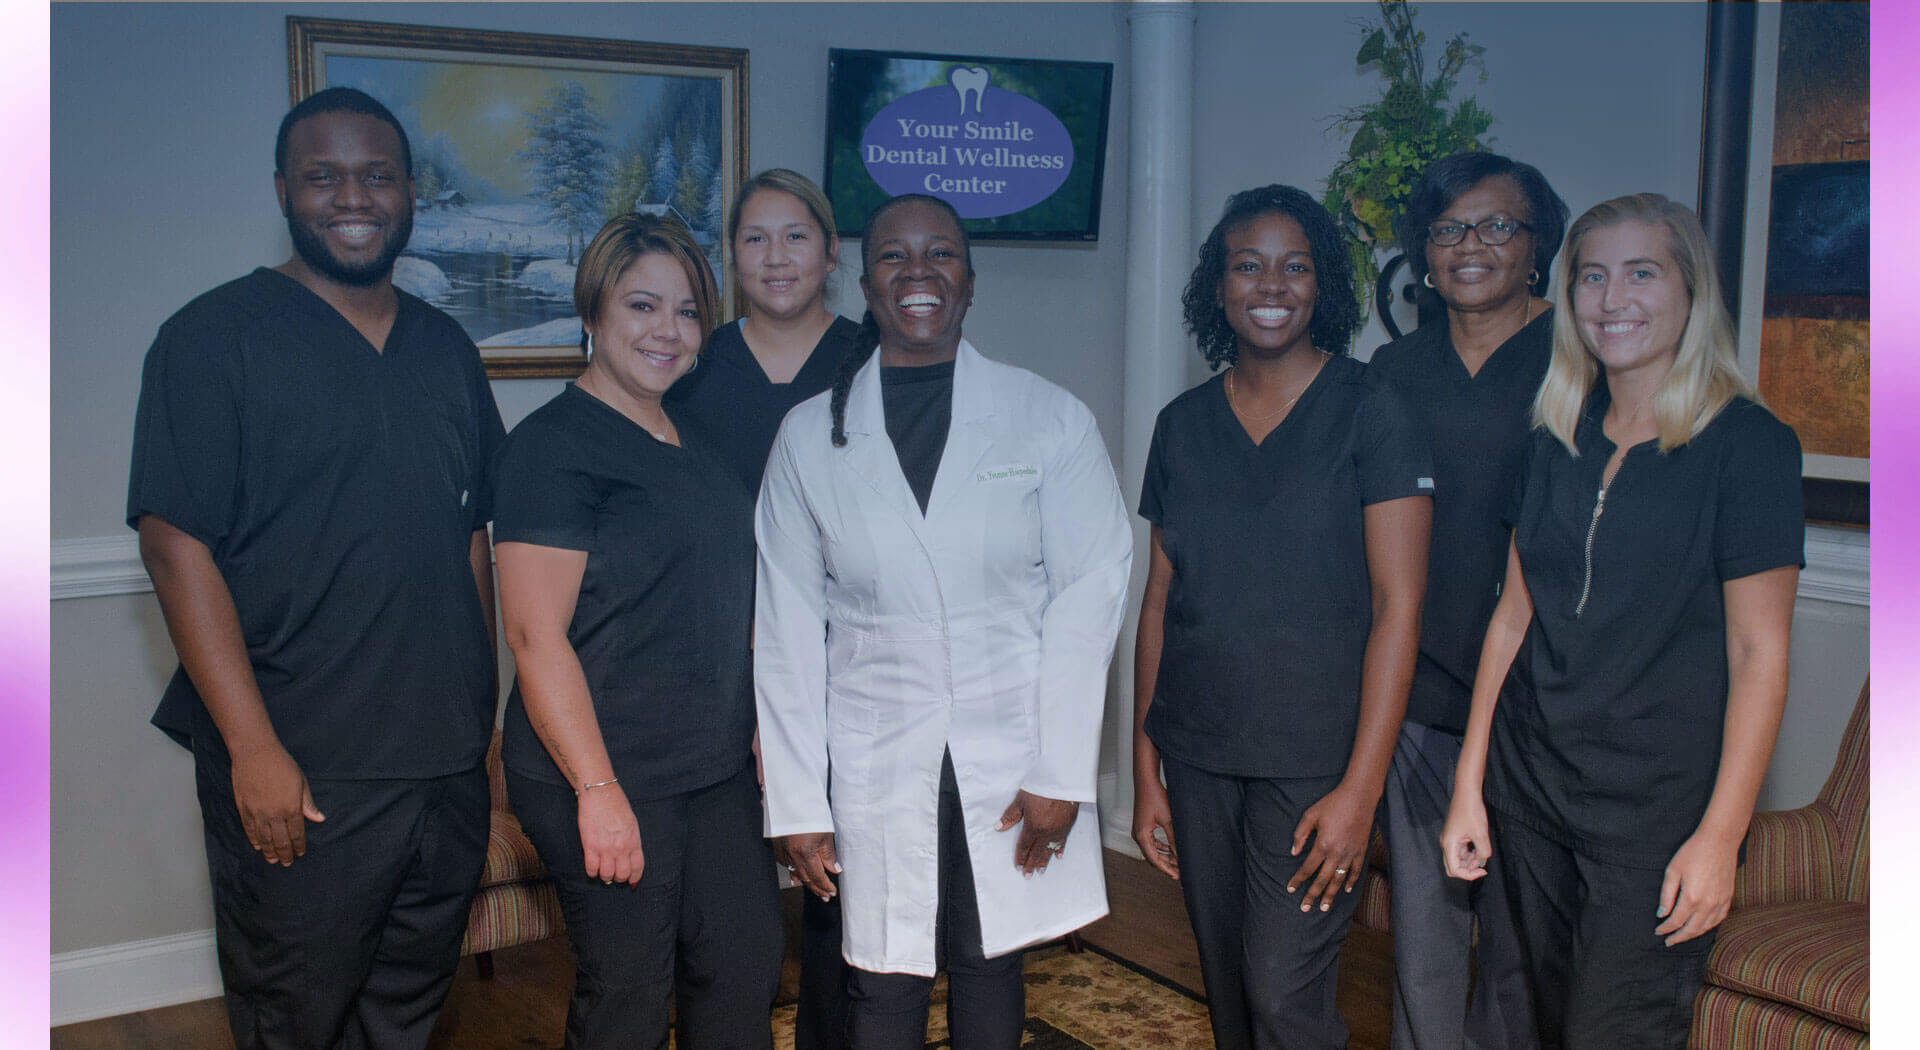 Dr. Yvonne Caton with her team